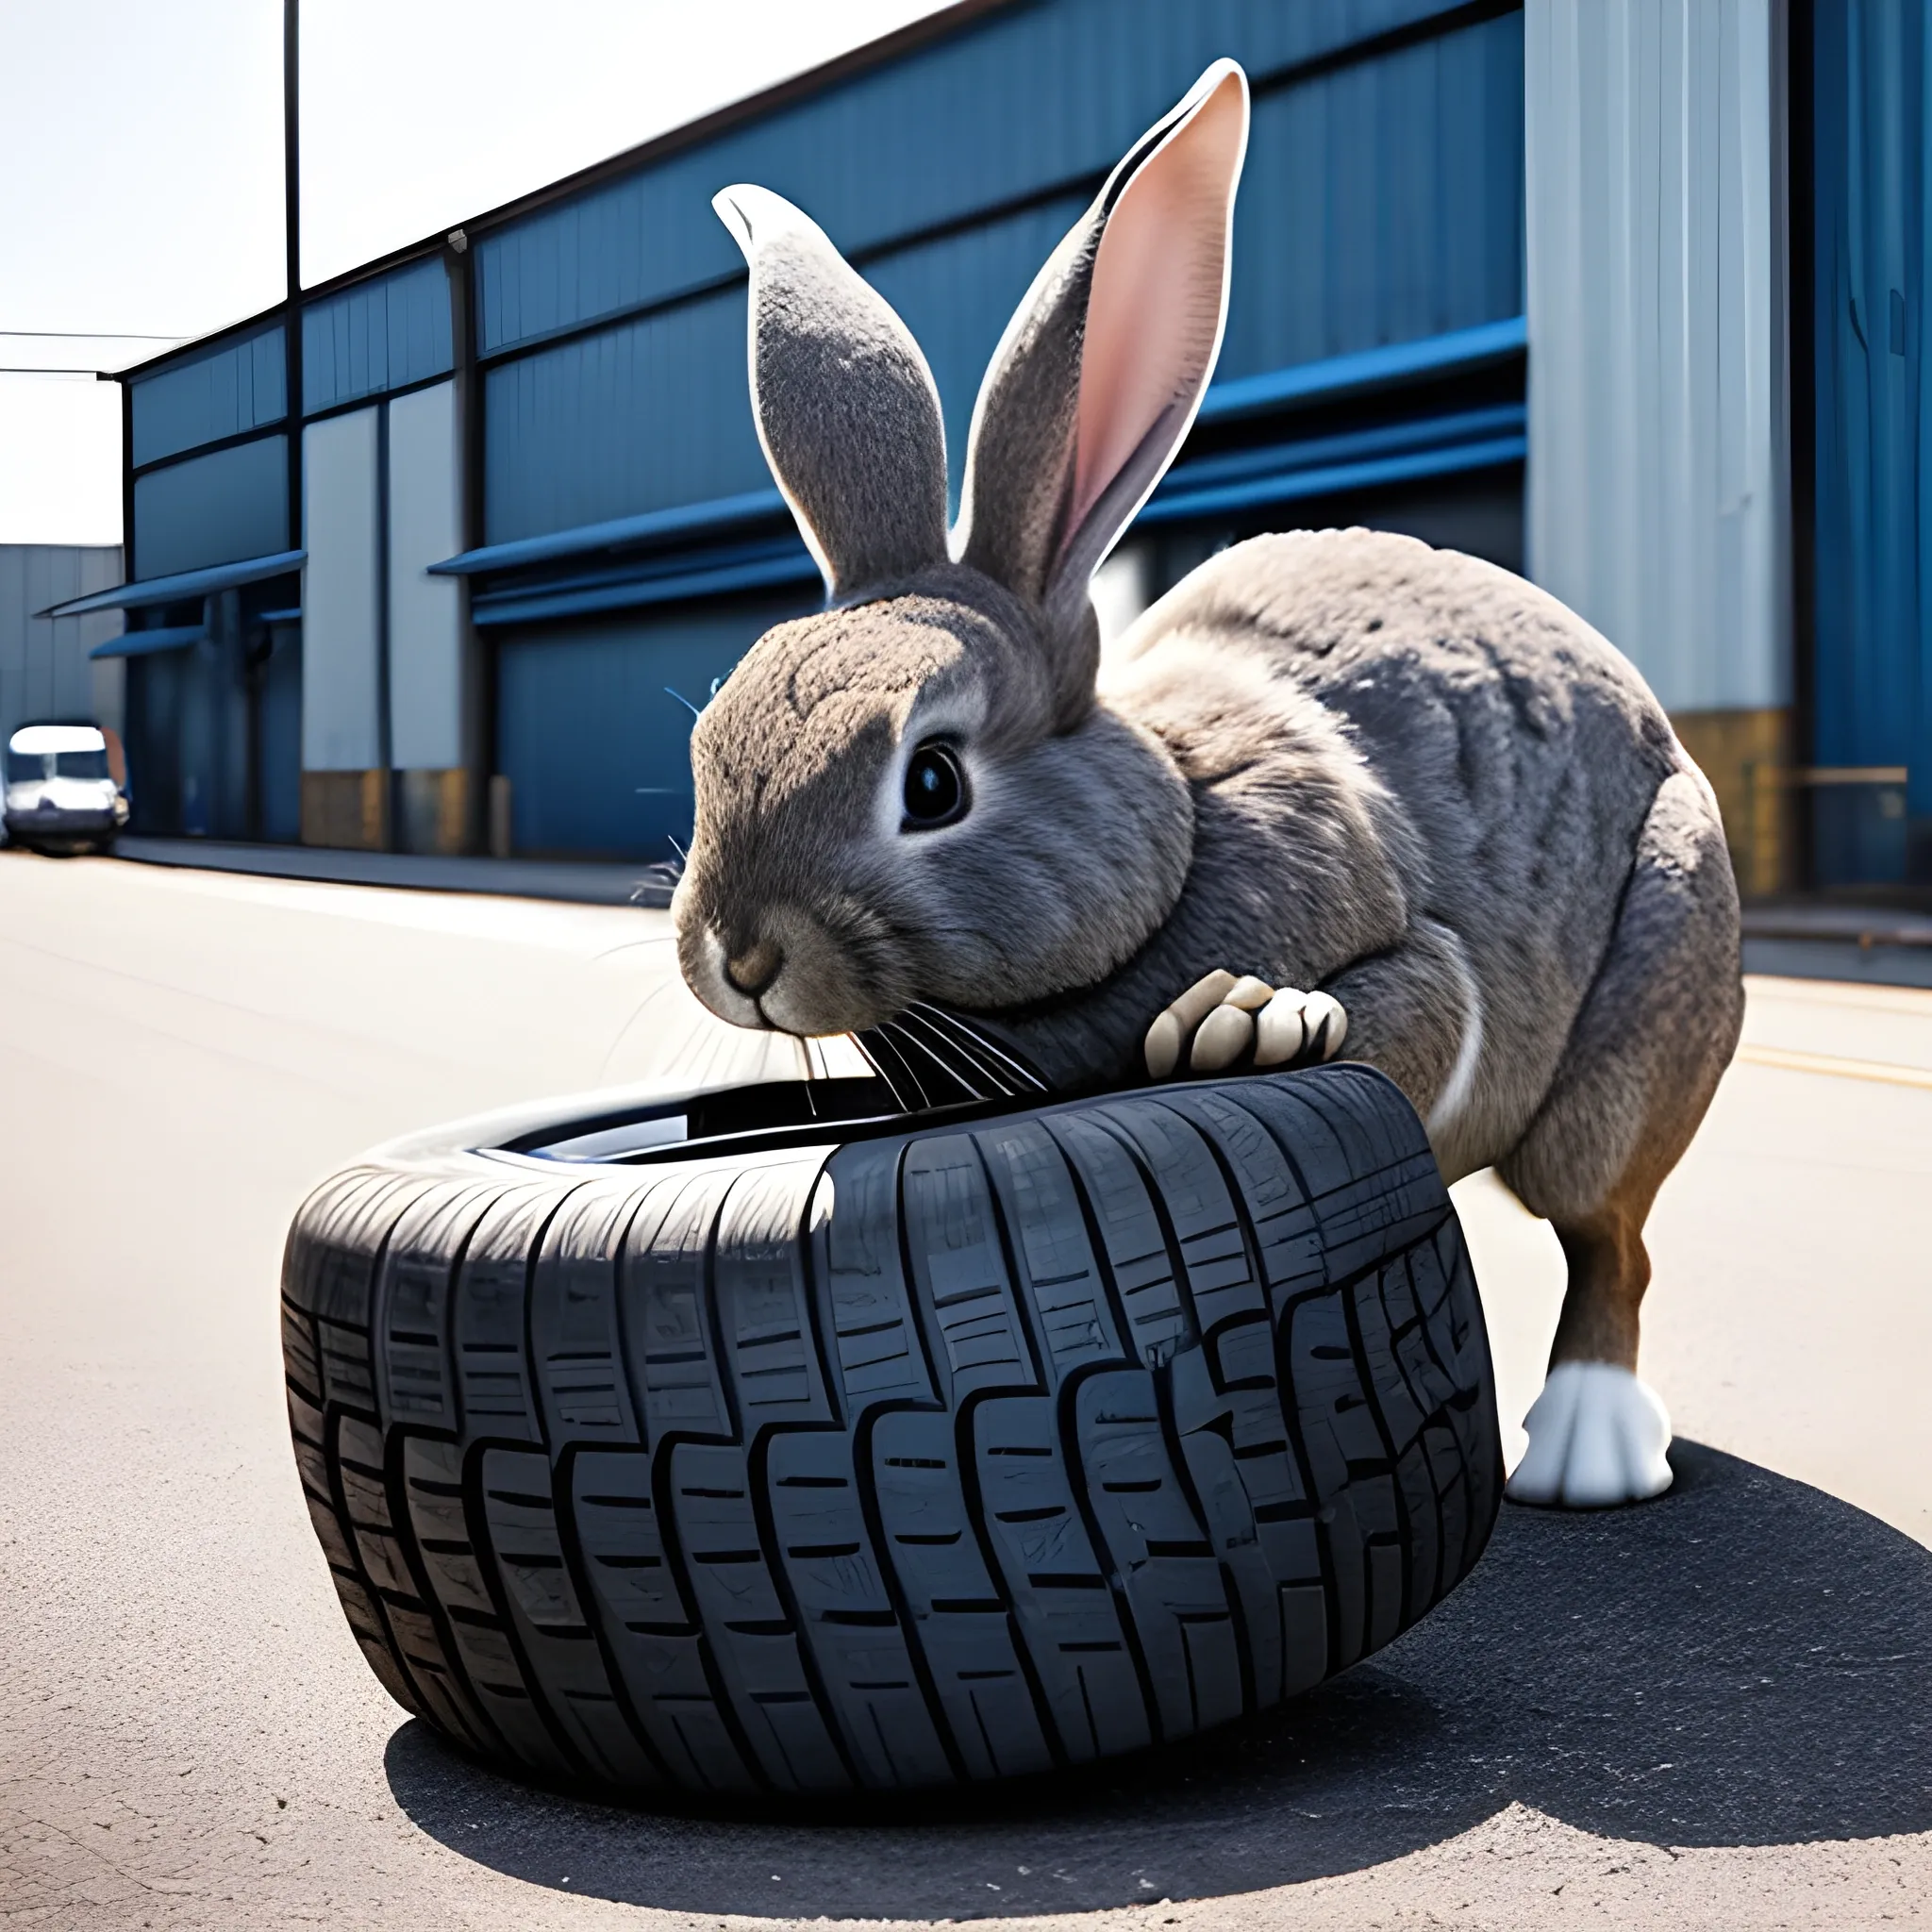 a large rabbit is eating tire in front of a factory, photography